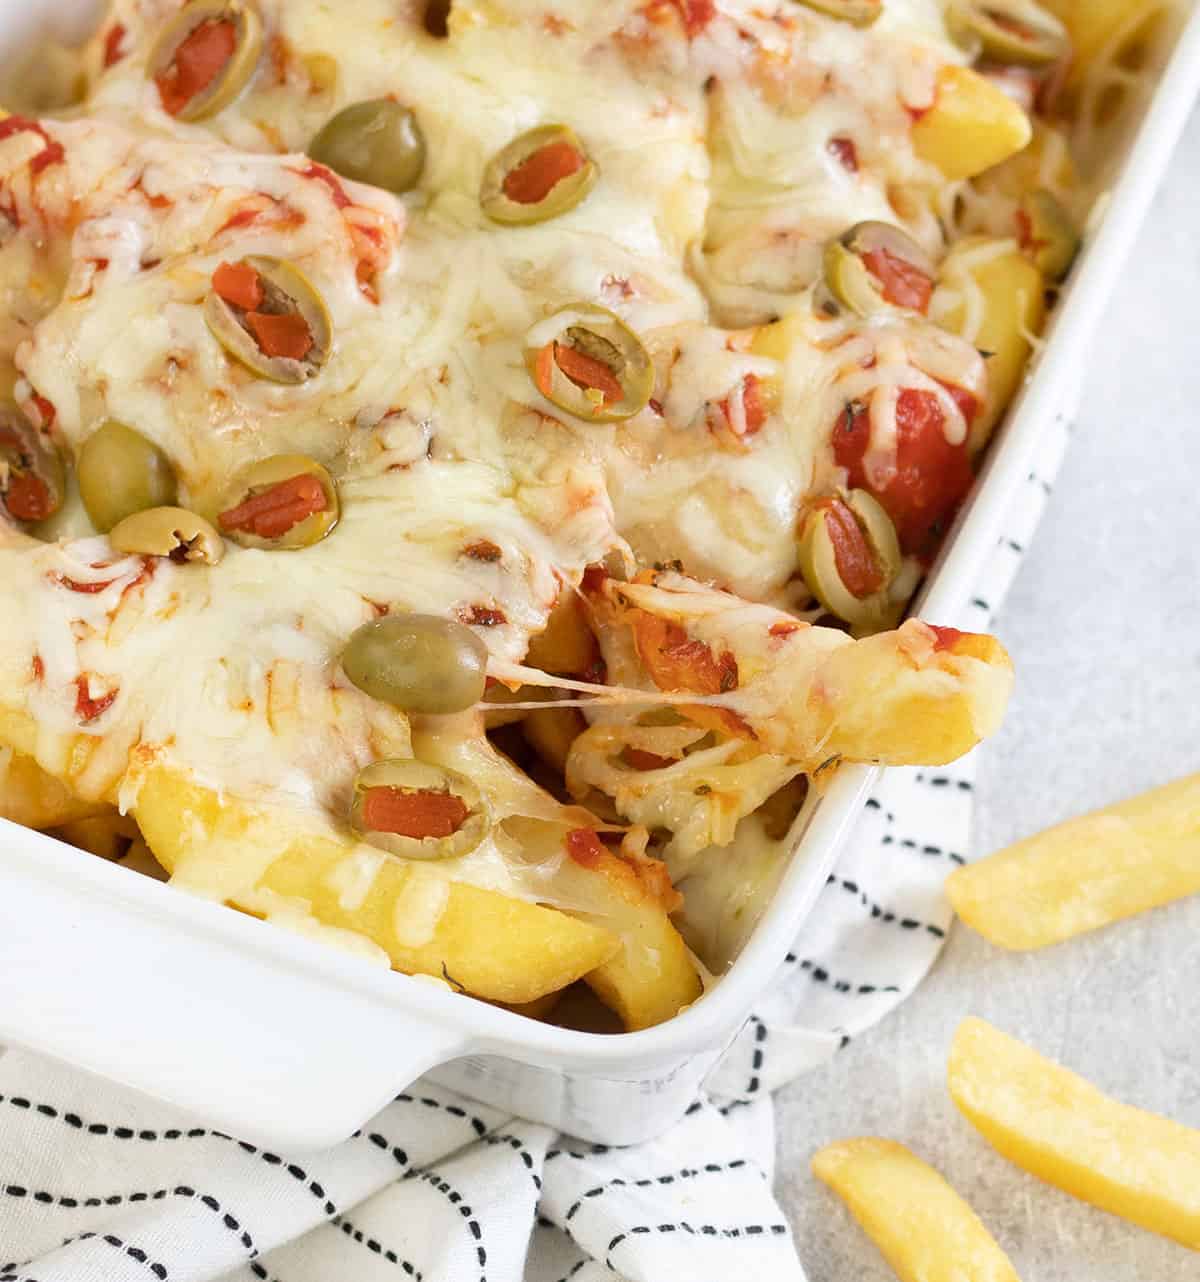 Some pizza fries are being taken from a tray, and the cheese is stretching.